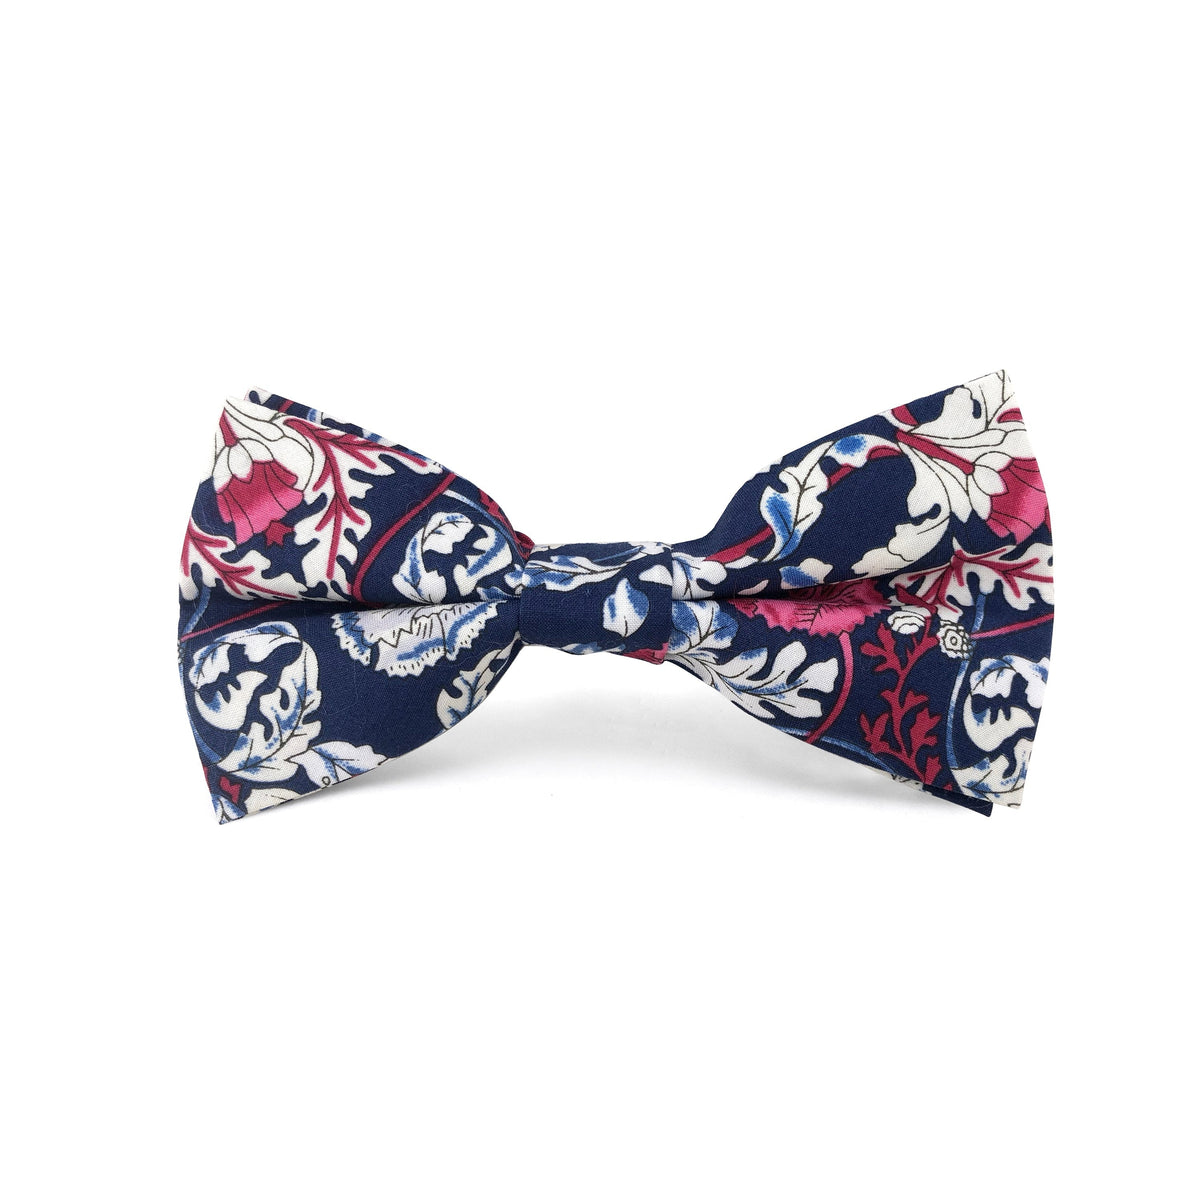 Pre-Tied Navy with White and Red Flower Cotton Bow Tie-Cufflinks.com.sg | Neckties.com.sg